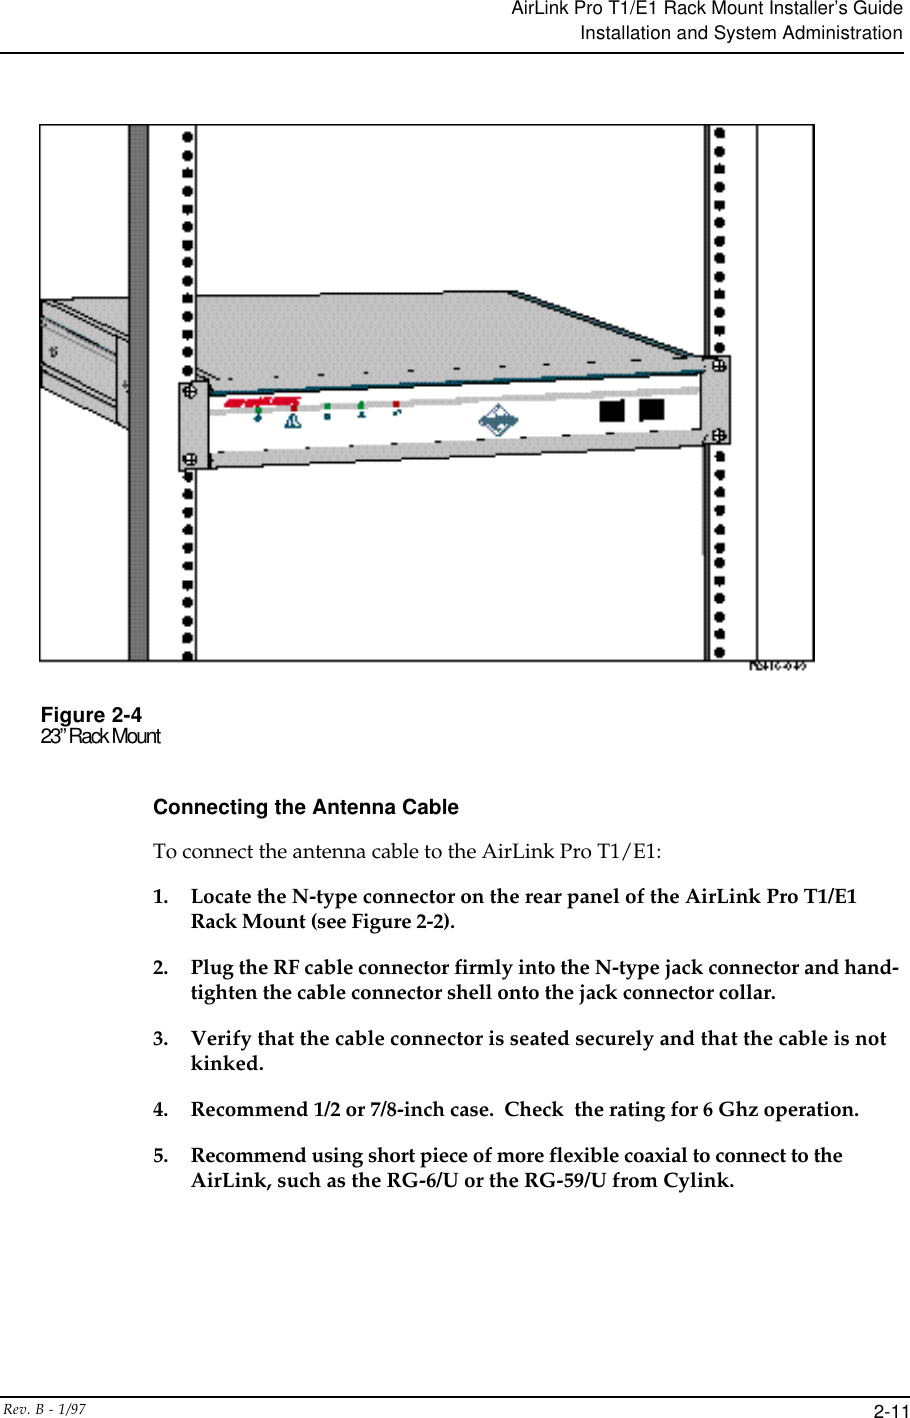 AirLink Pro T1/E1 Rack Mount Installer’s GuideInstallation and System AdministrationRev. B - 1/97 2-11Figure 2-423” Rack MountConnecting the Antenna CableTo connect the antenna cable to the AirLink Pro T1/E1:1. Locate the N-type connector on the rear panel of the AirLink Pro T1/E1Rack Mount (see Figure 2-2).2. Plug the RF cable connector firmly into the N-type jack connector and hand-tighten the cable connector shell onto the jack connector collar.3. Verify that the cable connector is seated securely and that the cable is notkinked.4. Recommend 1/2 or 7/8-inch case.  Check  the rating for 6 Ghz operation.5. Recommend using short piece of more flexible coaxial to connect to theAirLink, such as the RG-6/U or the RG-59/U from Cylink.